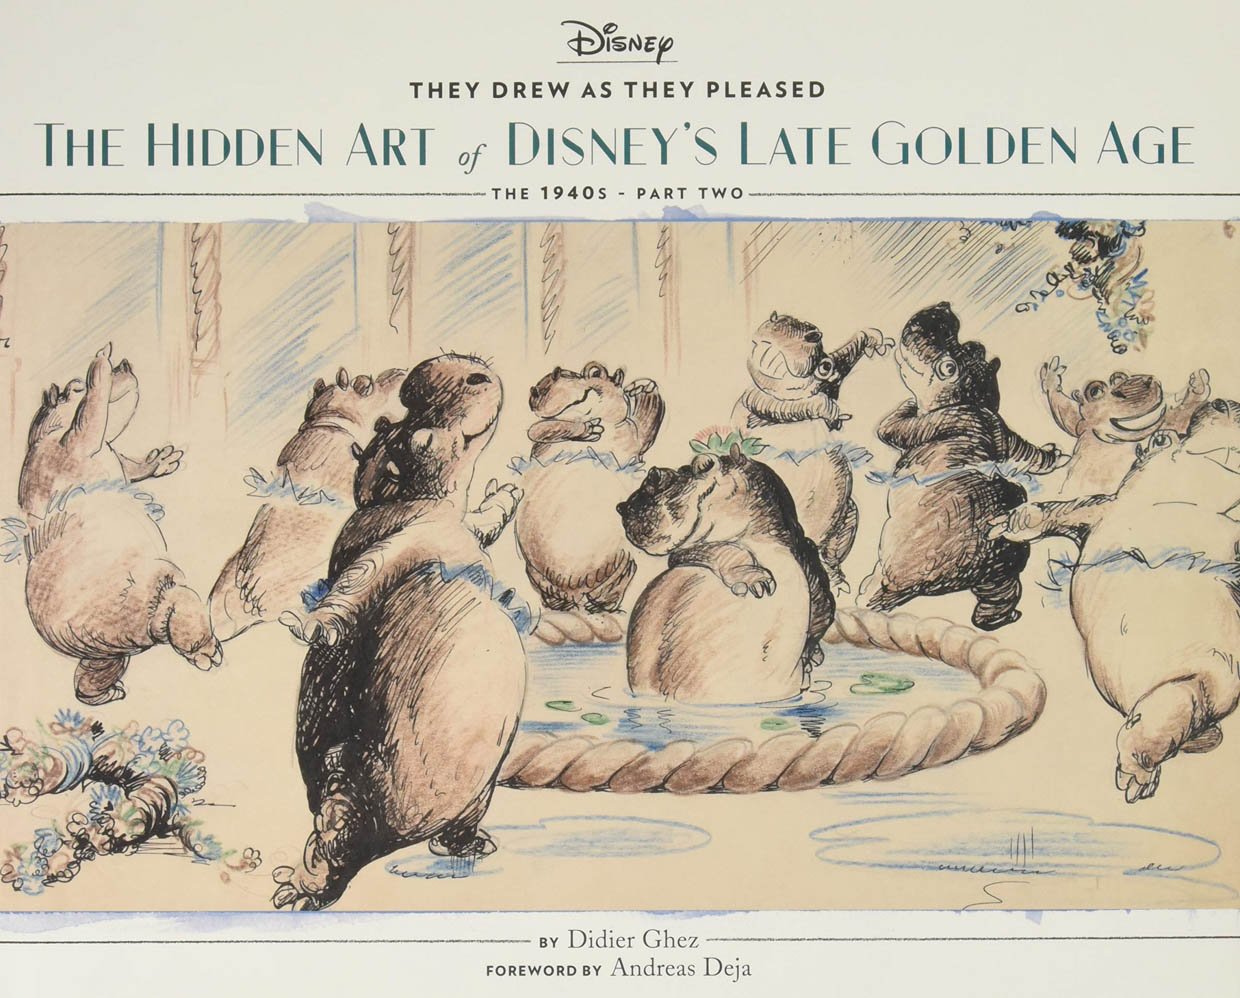 The Hidden Art of Disney: They Drew as They Pleased